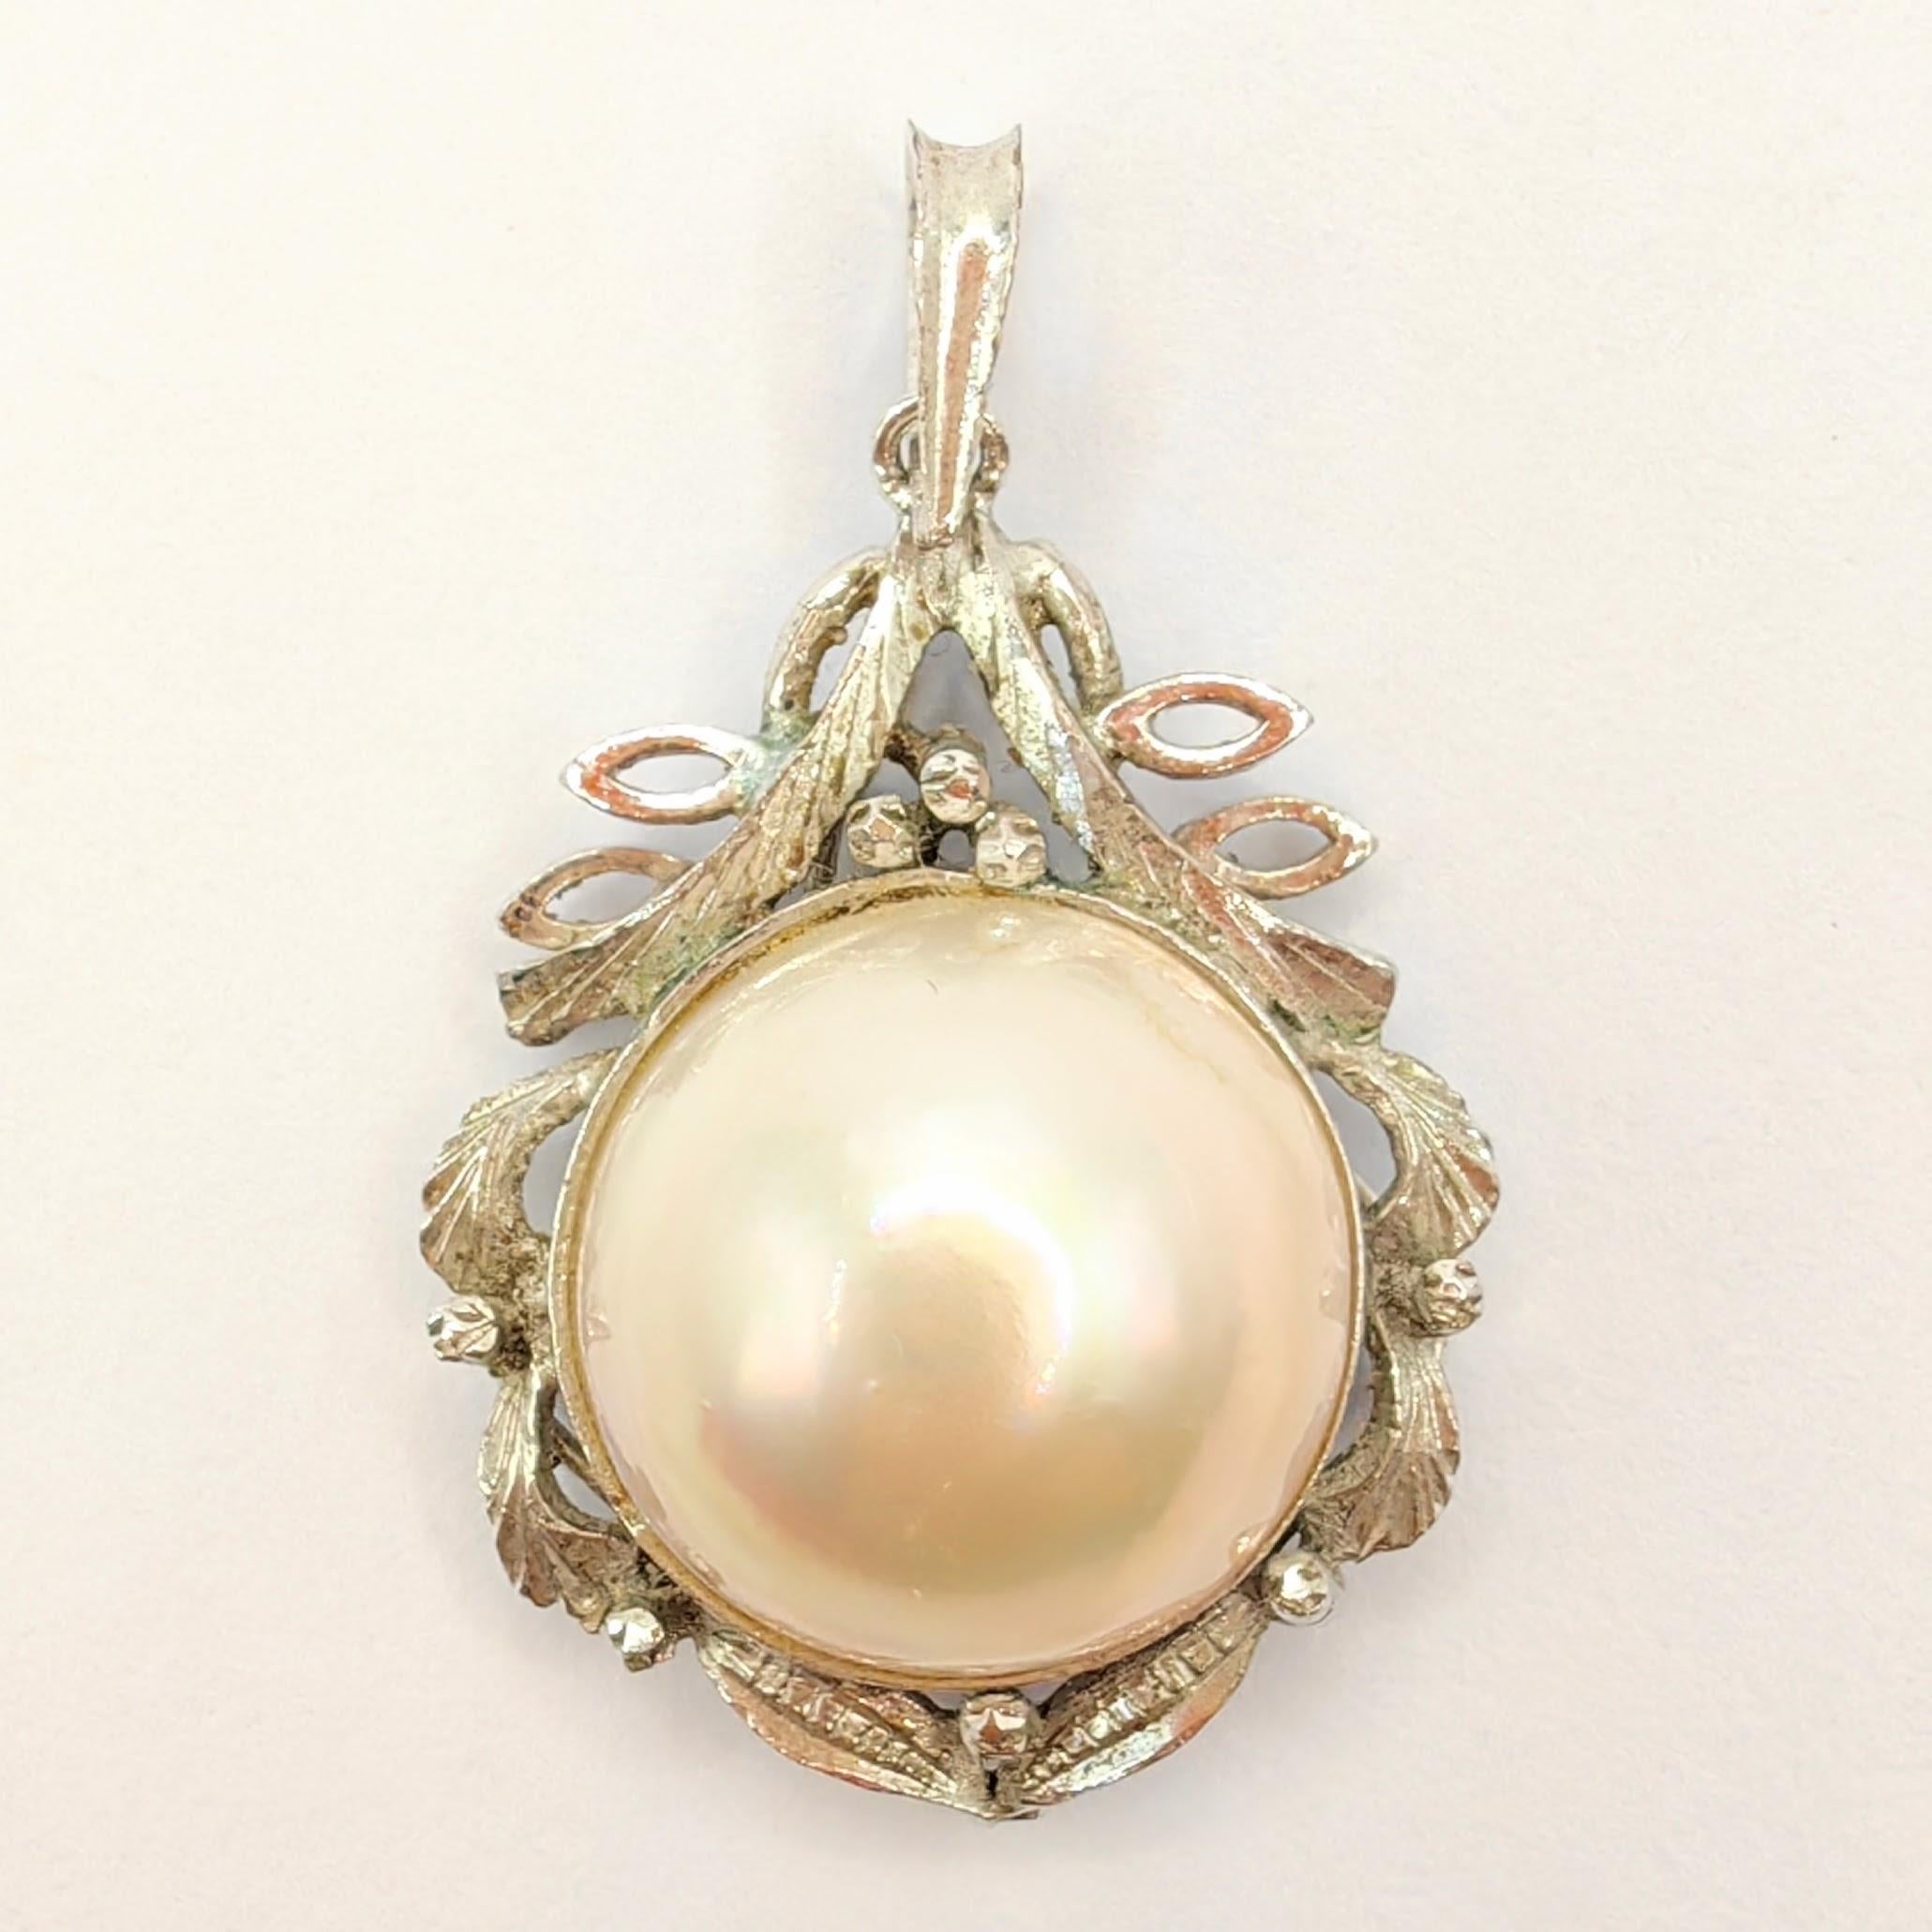 Introducing our Vintage Baroque Style 14mm Mabé Pearl Necklace Pendant in Sterling Silver, a stunning piece that showcases the timeless elegance of a lustrous Mabé Pearl in a unique and intricate design.

At the center of this pendant rests a